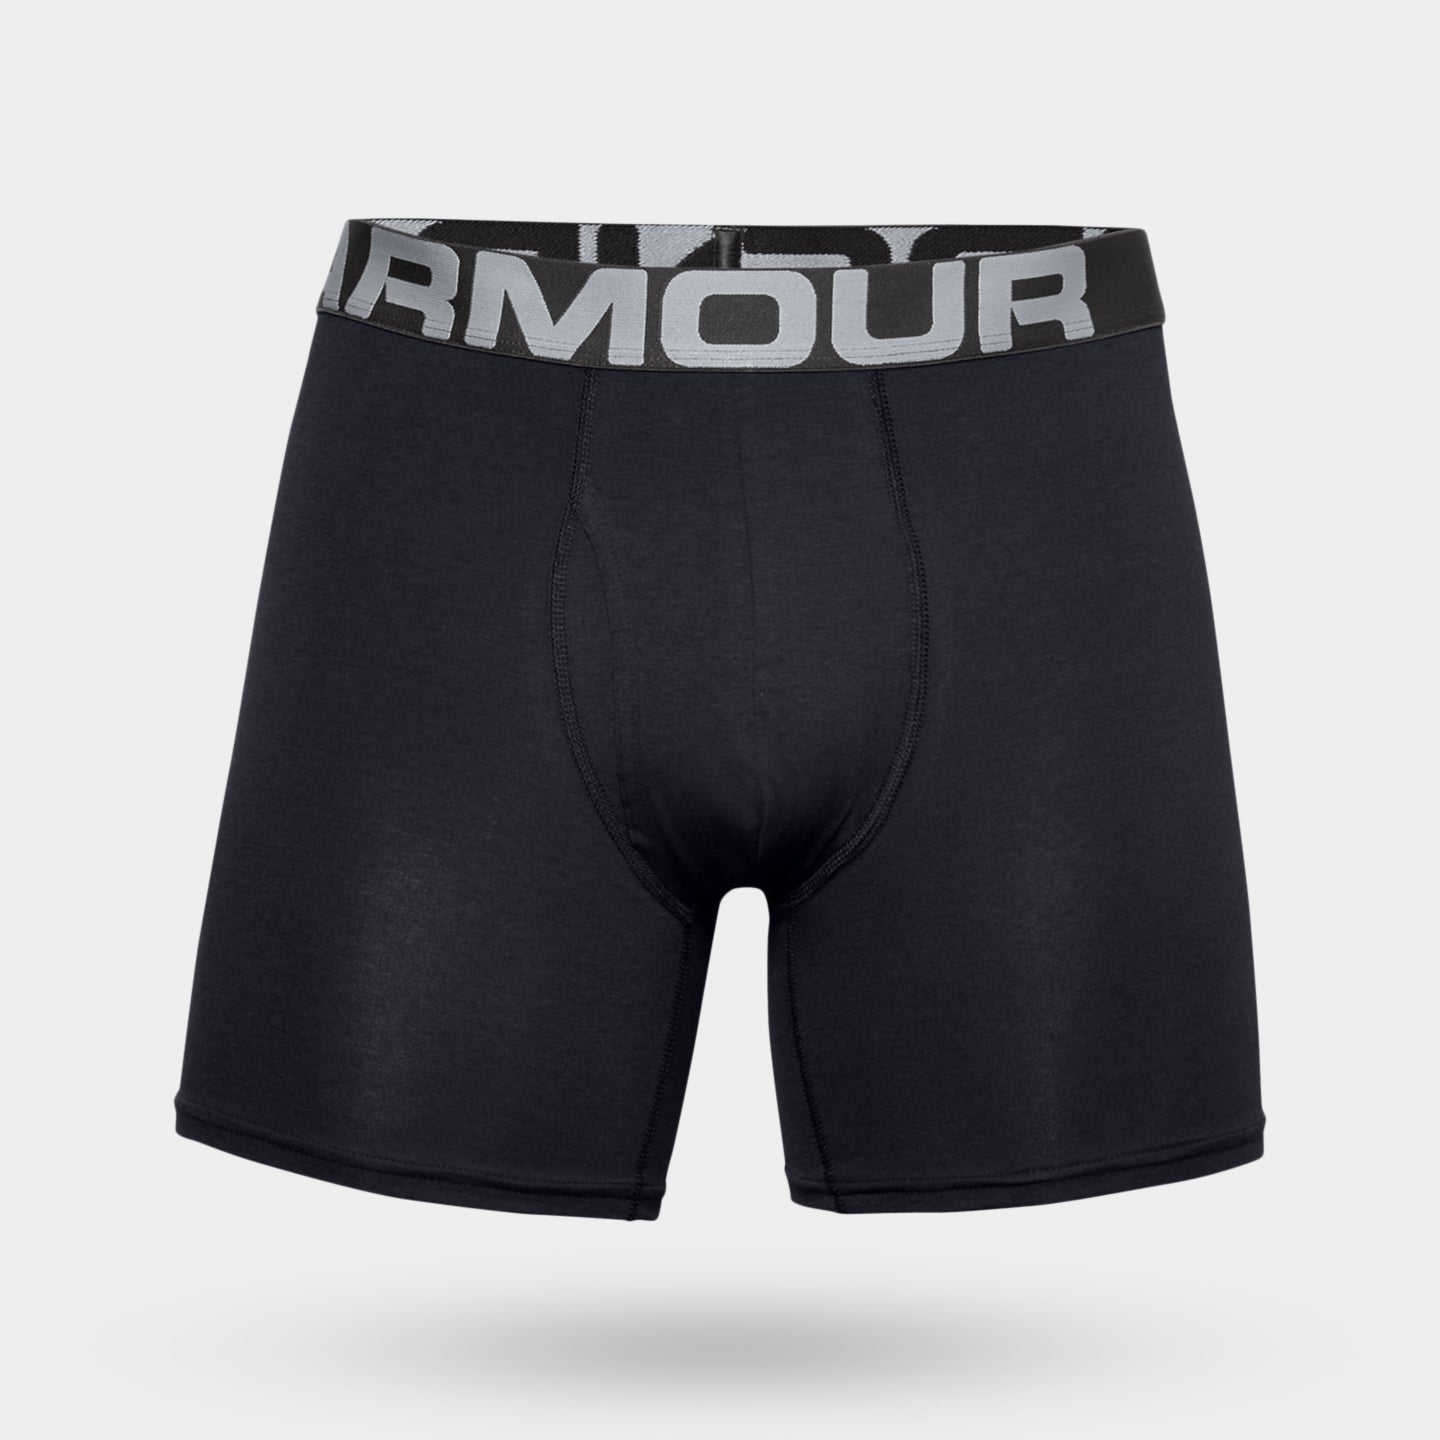 Under Armour Charged Cotton 6" 3-pk, Black, 2XL A1